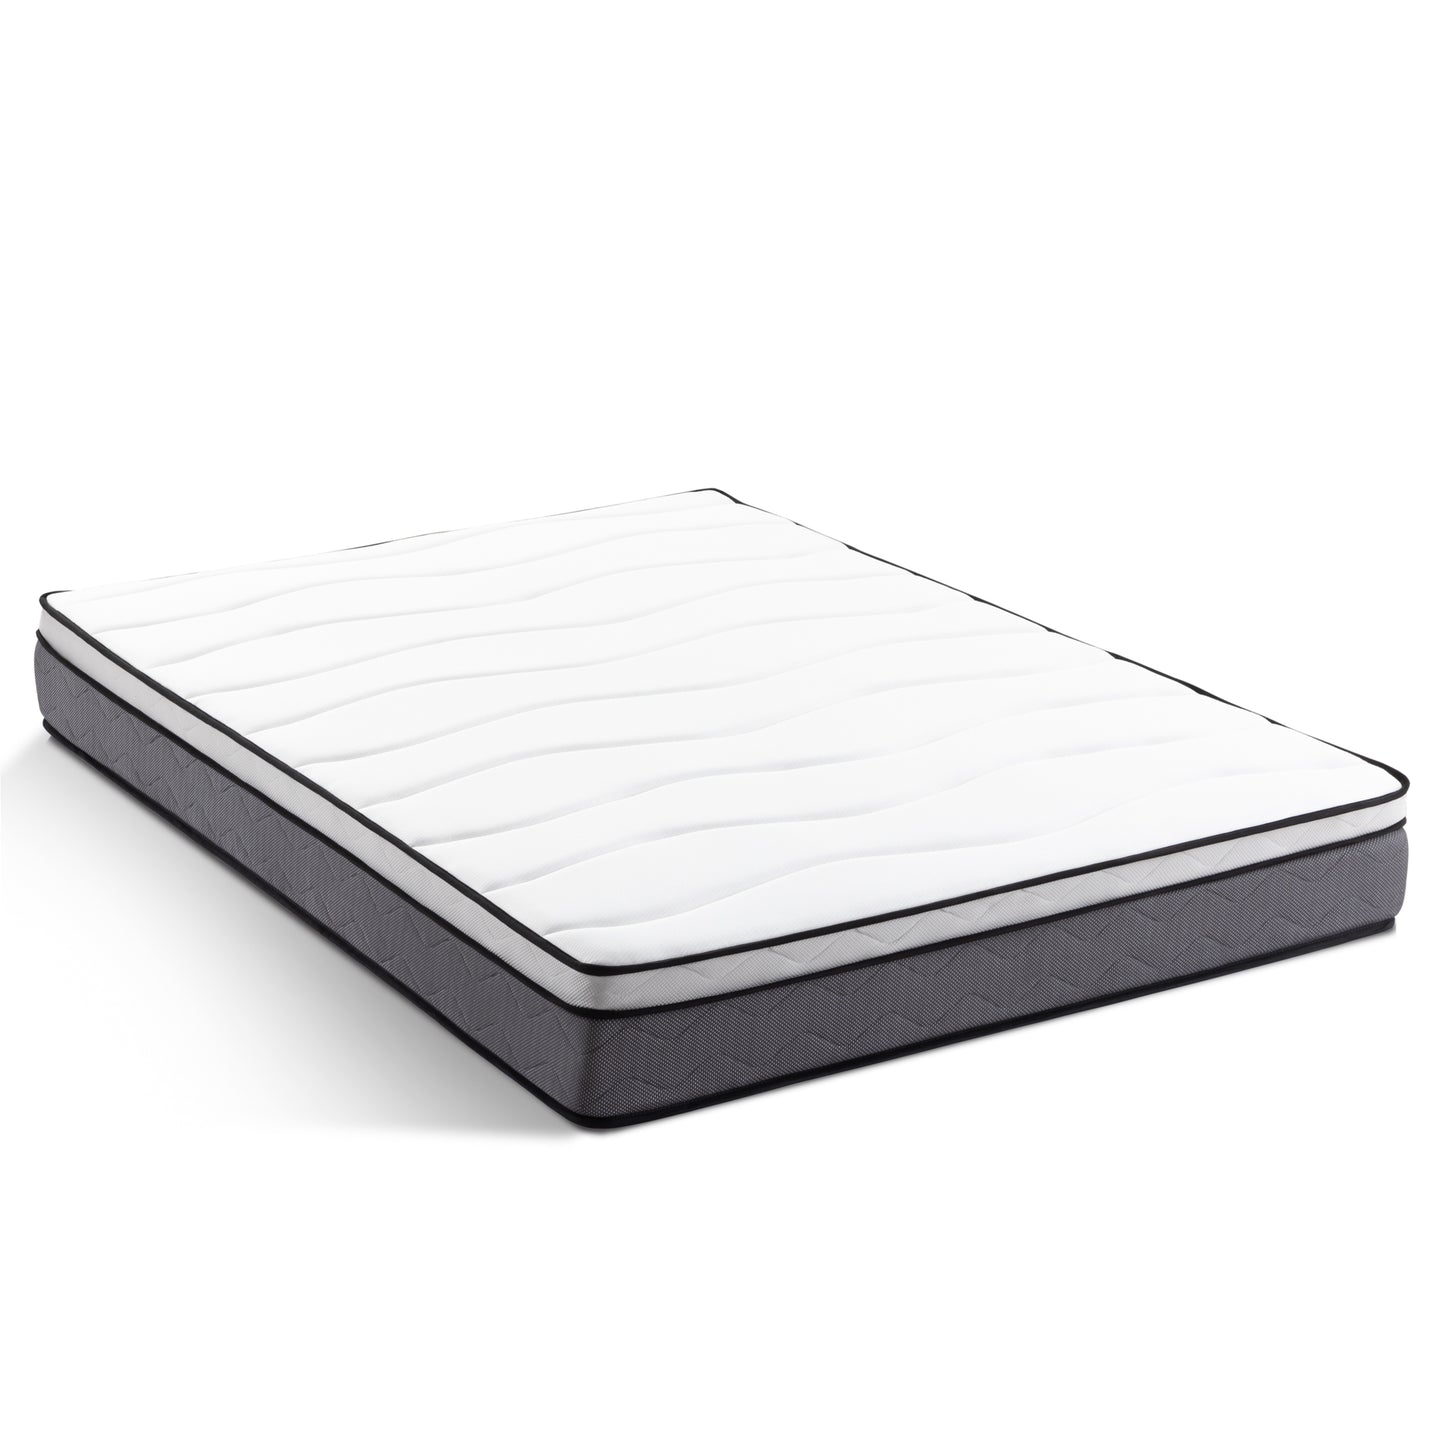 10″ Plush Pillow-Top (Medium-Soft) Mattress - KING Size only
(BED-IN-A-BOX)